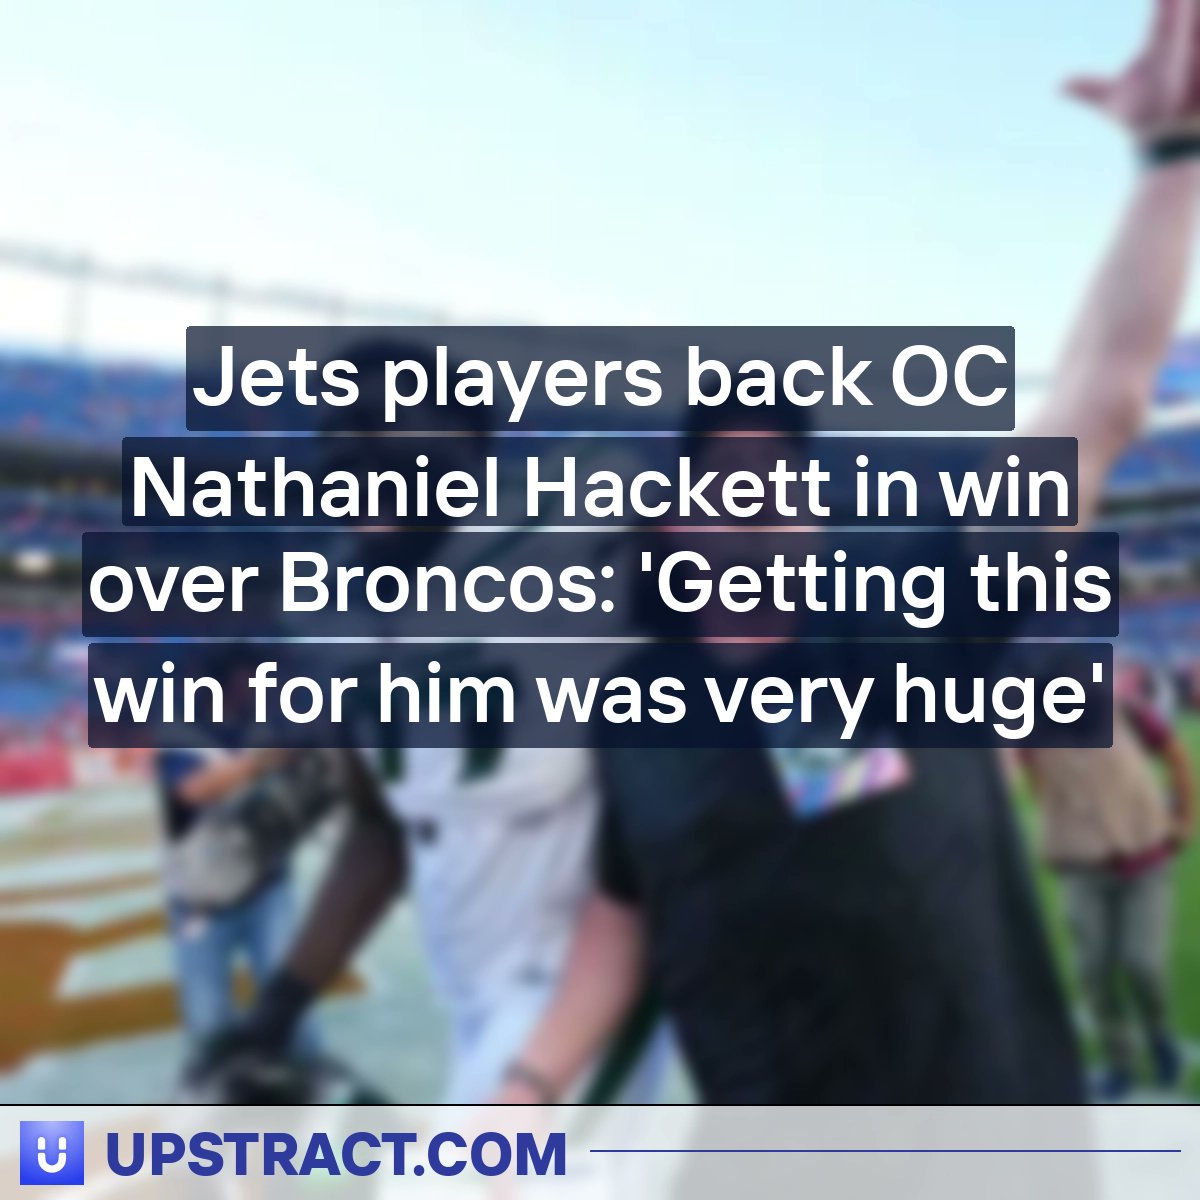 Jets players back OC Nathaniel Hackett in win over Broncos: 'Getting this win for him was very huge'
#cjuzomah #uzomah #newyorkdailynews
nfl.com/news/jets-play…